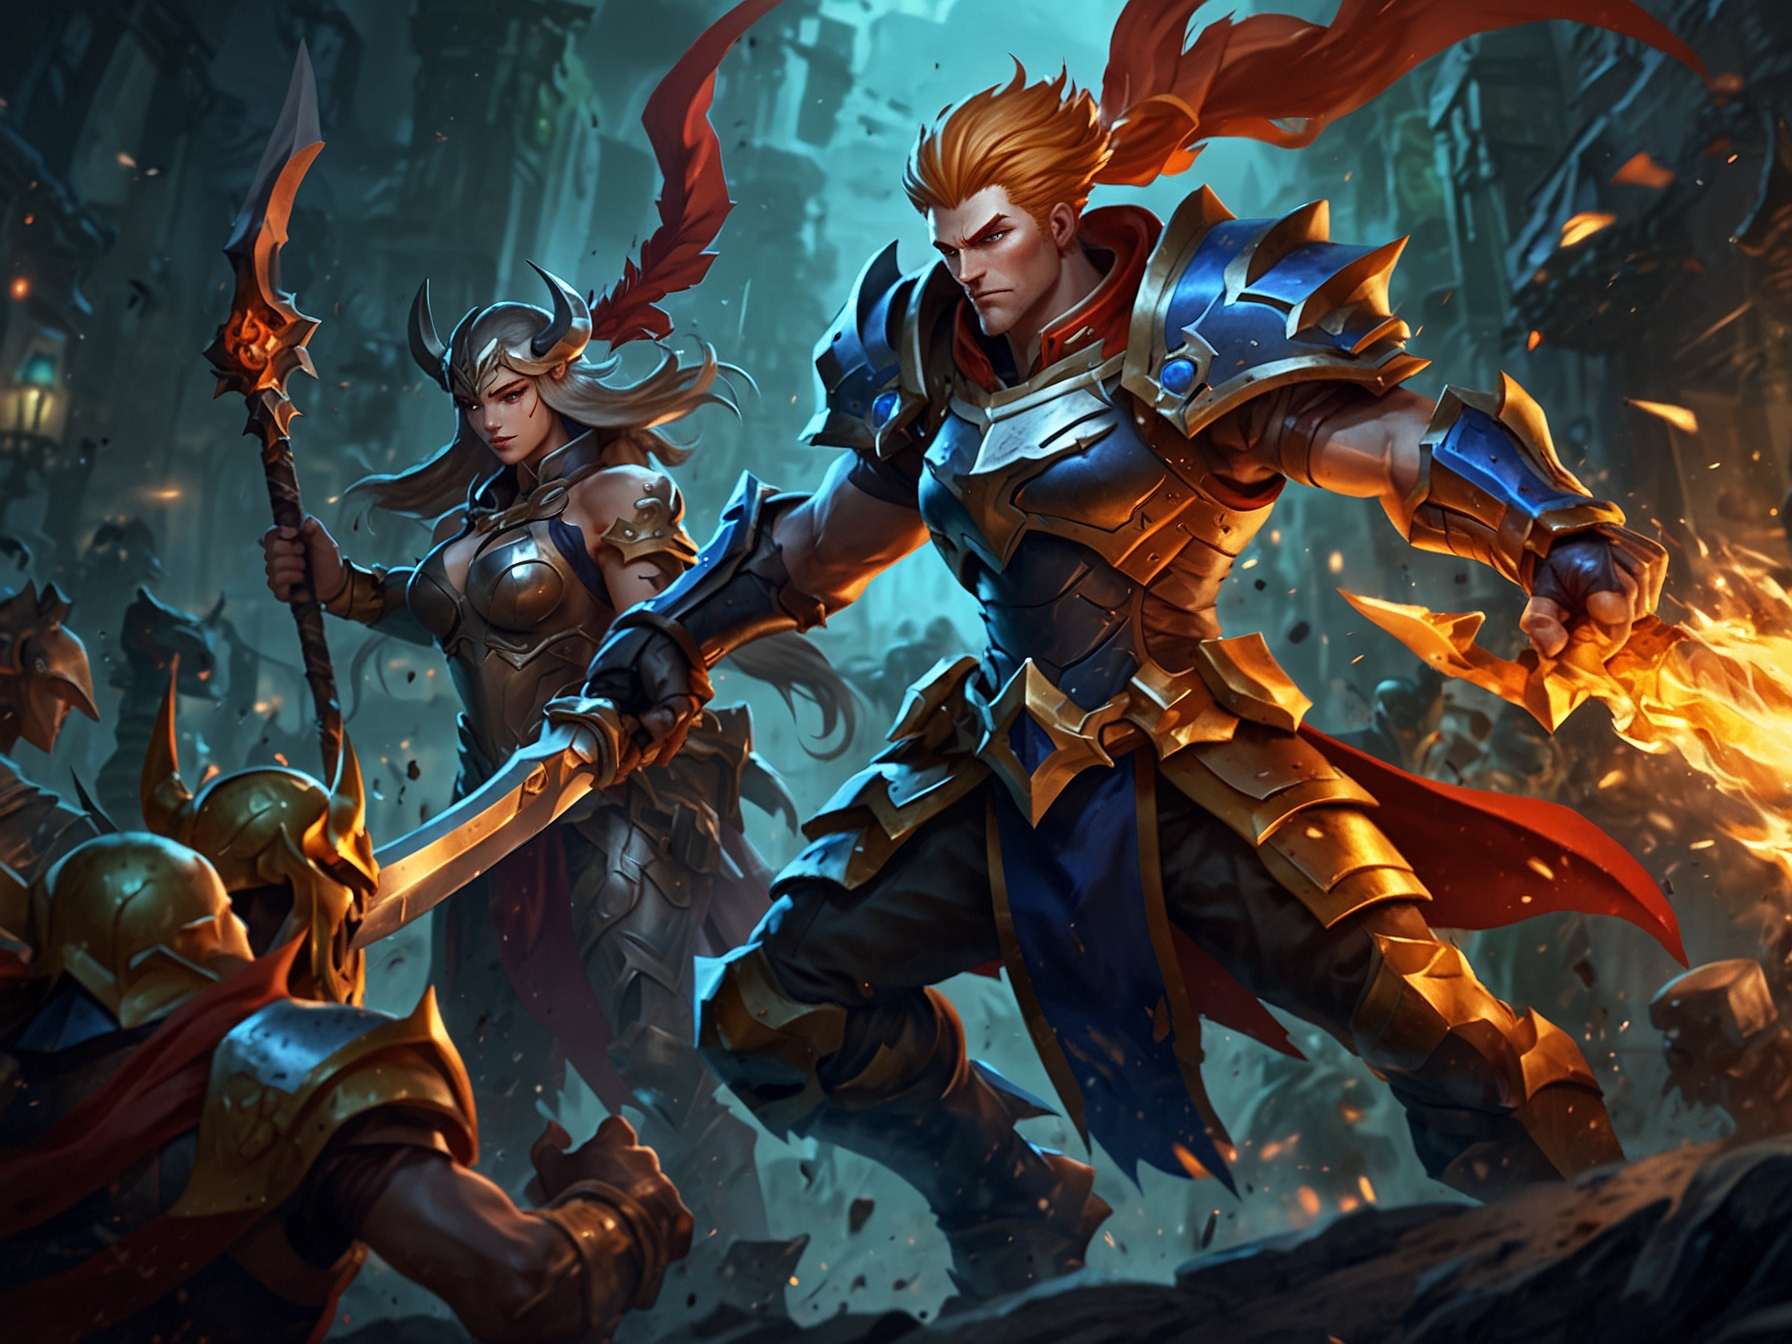 A captivating battle scene showcasing various heroes with unique abilities in the most popular mobile MOBA game, emphasizing its visually stunning and meticulously designed graphics.